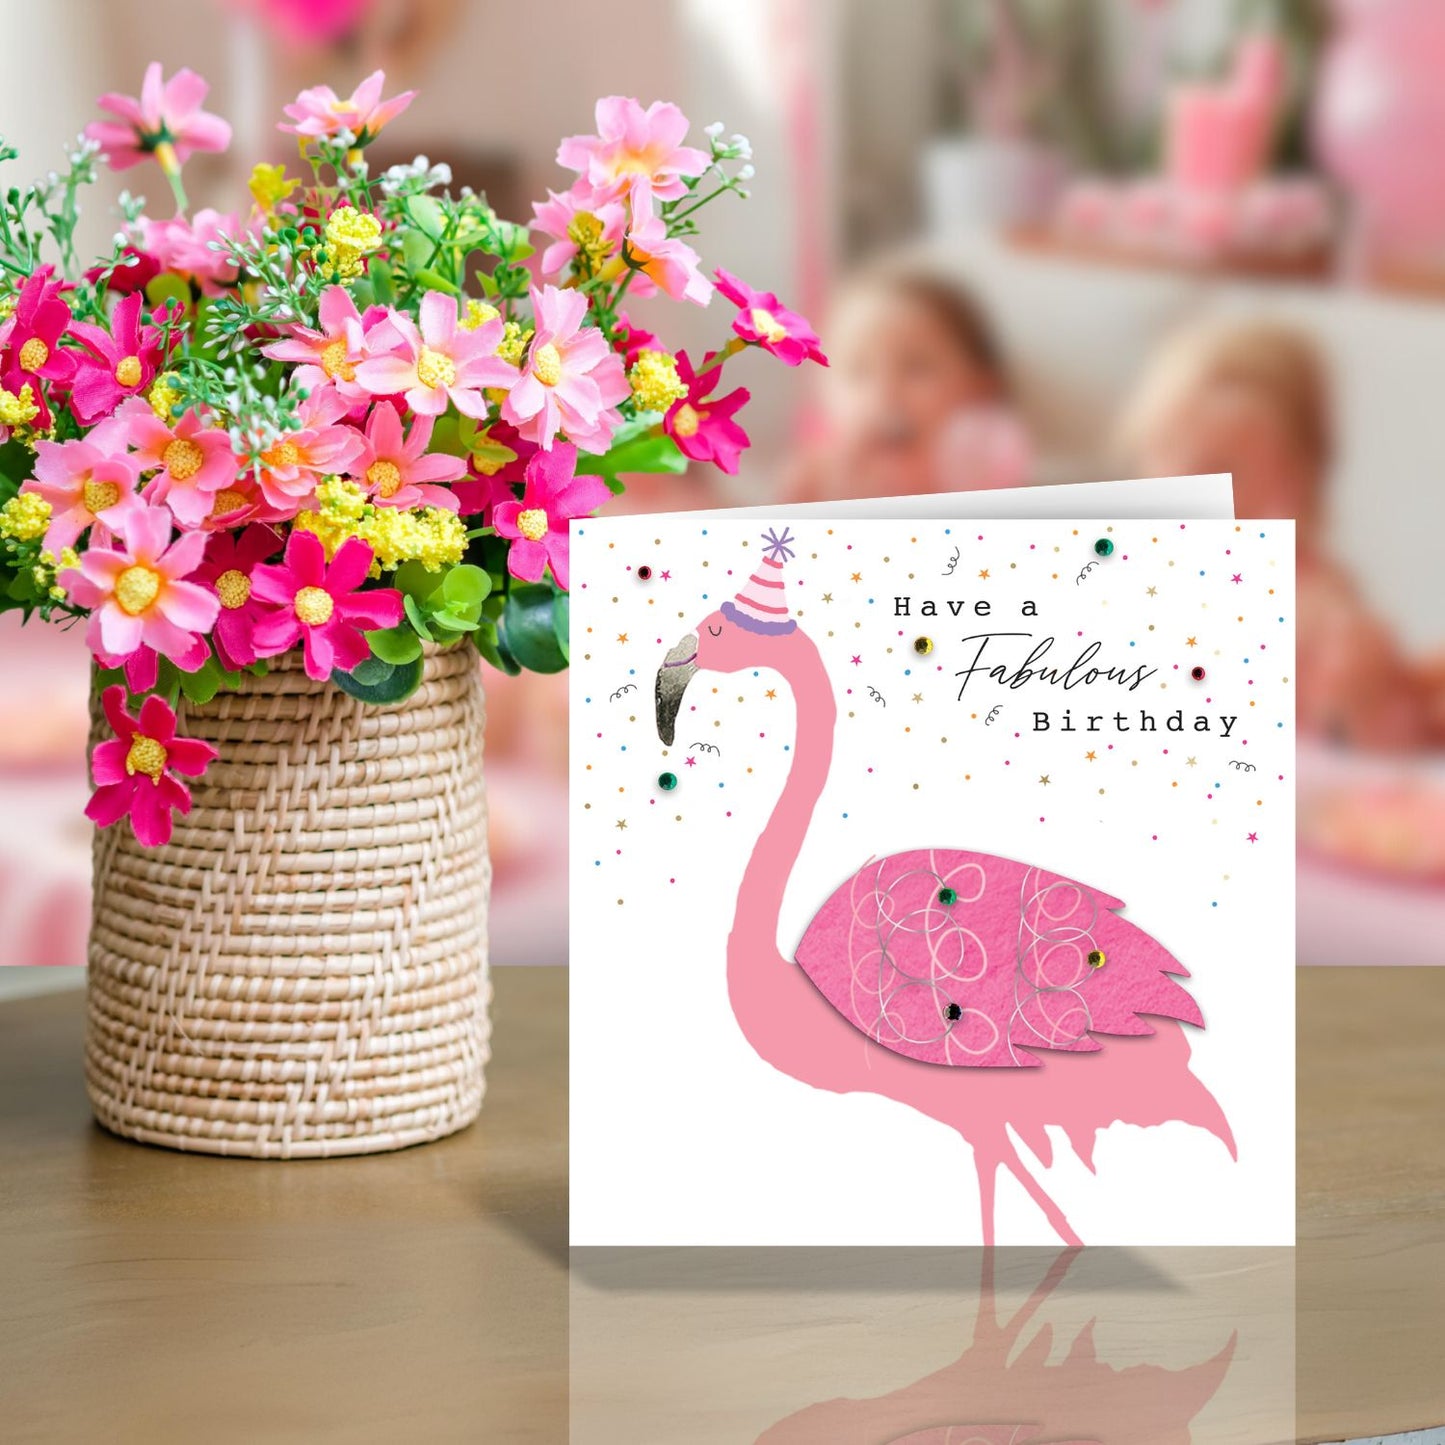 Have A Fabulous Birthday Flamingo Fun! Birthday Hand-Finished Greeting Card